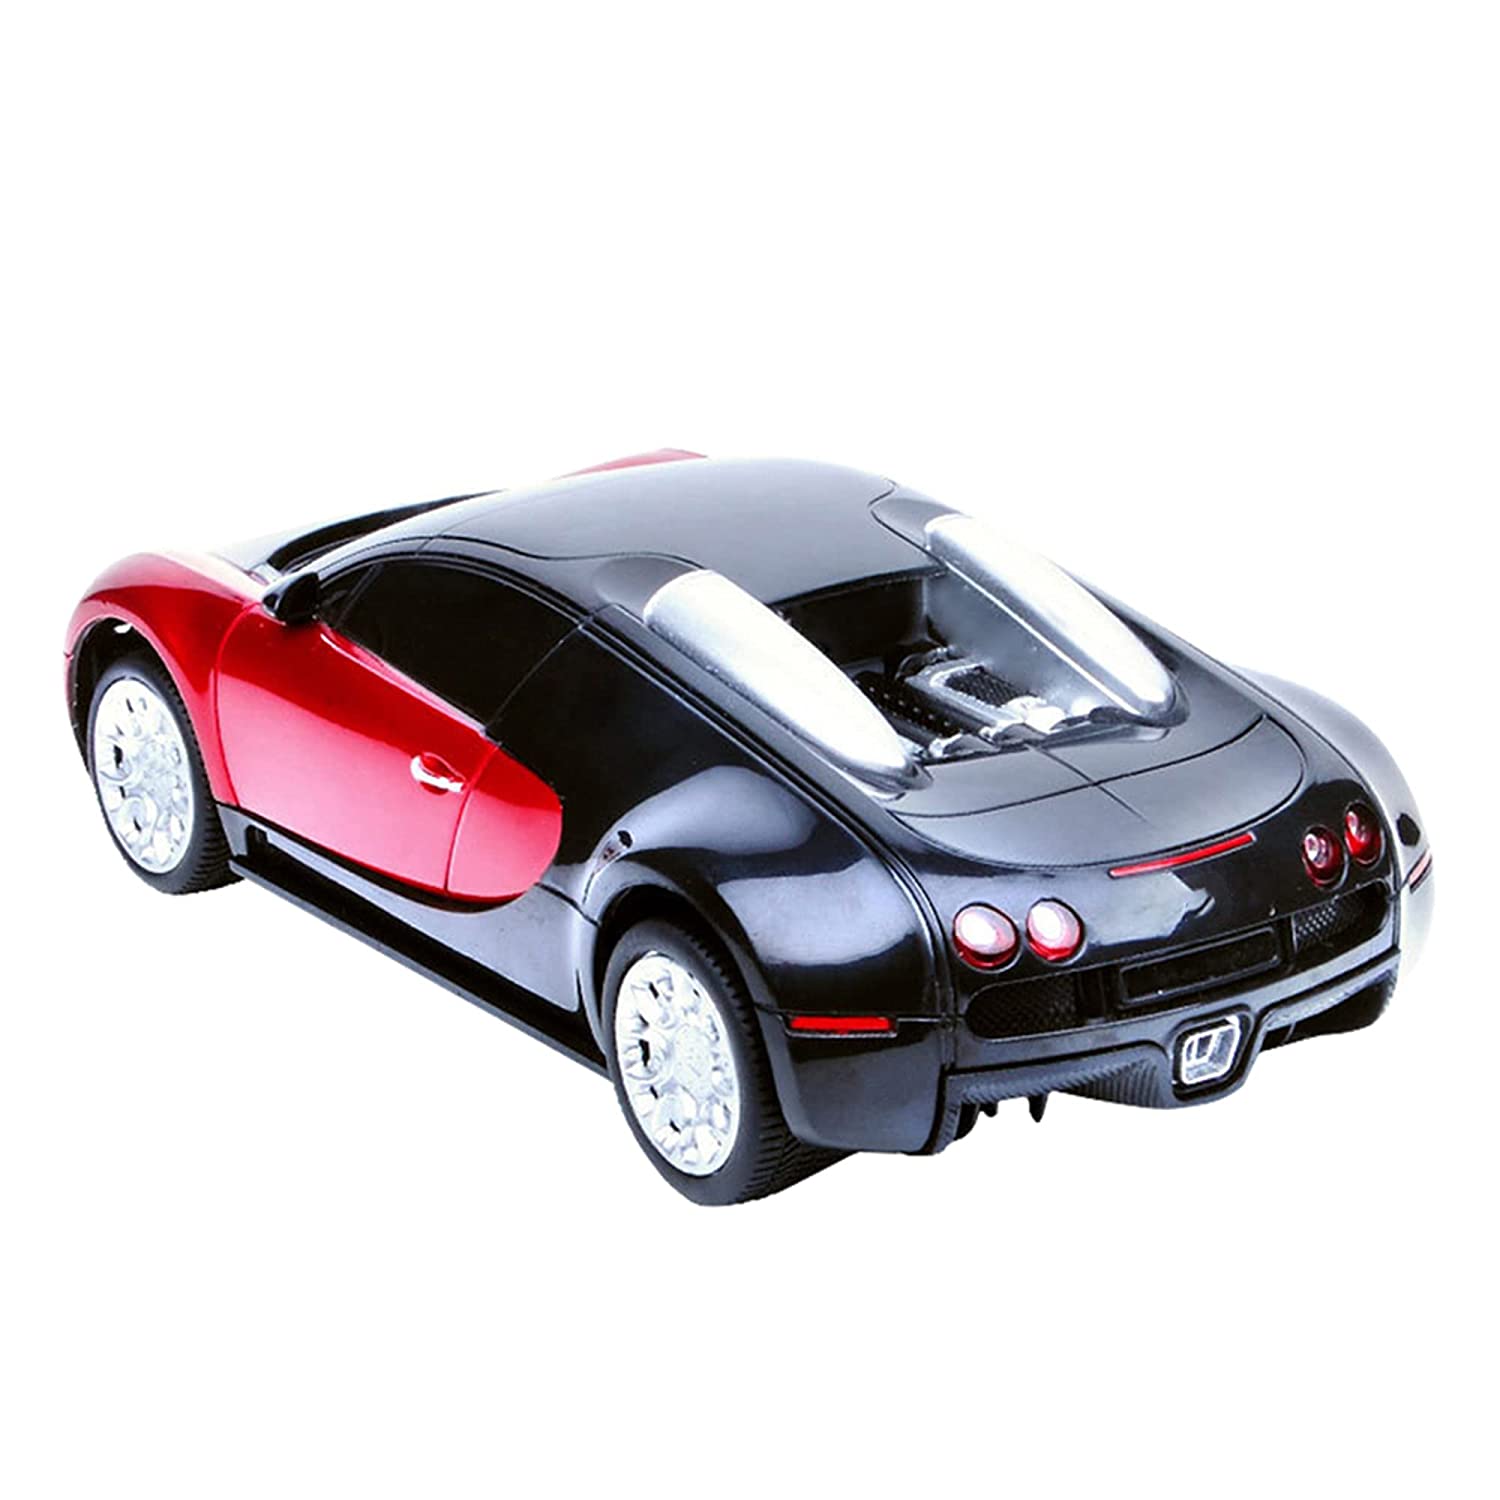 Playzu R/C 1:24 Scale Sports Vehicle, Red & Black - Remote Control Car for Kids Ages 6+